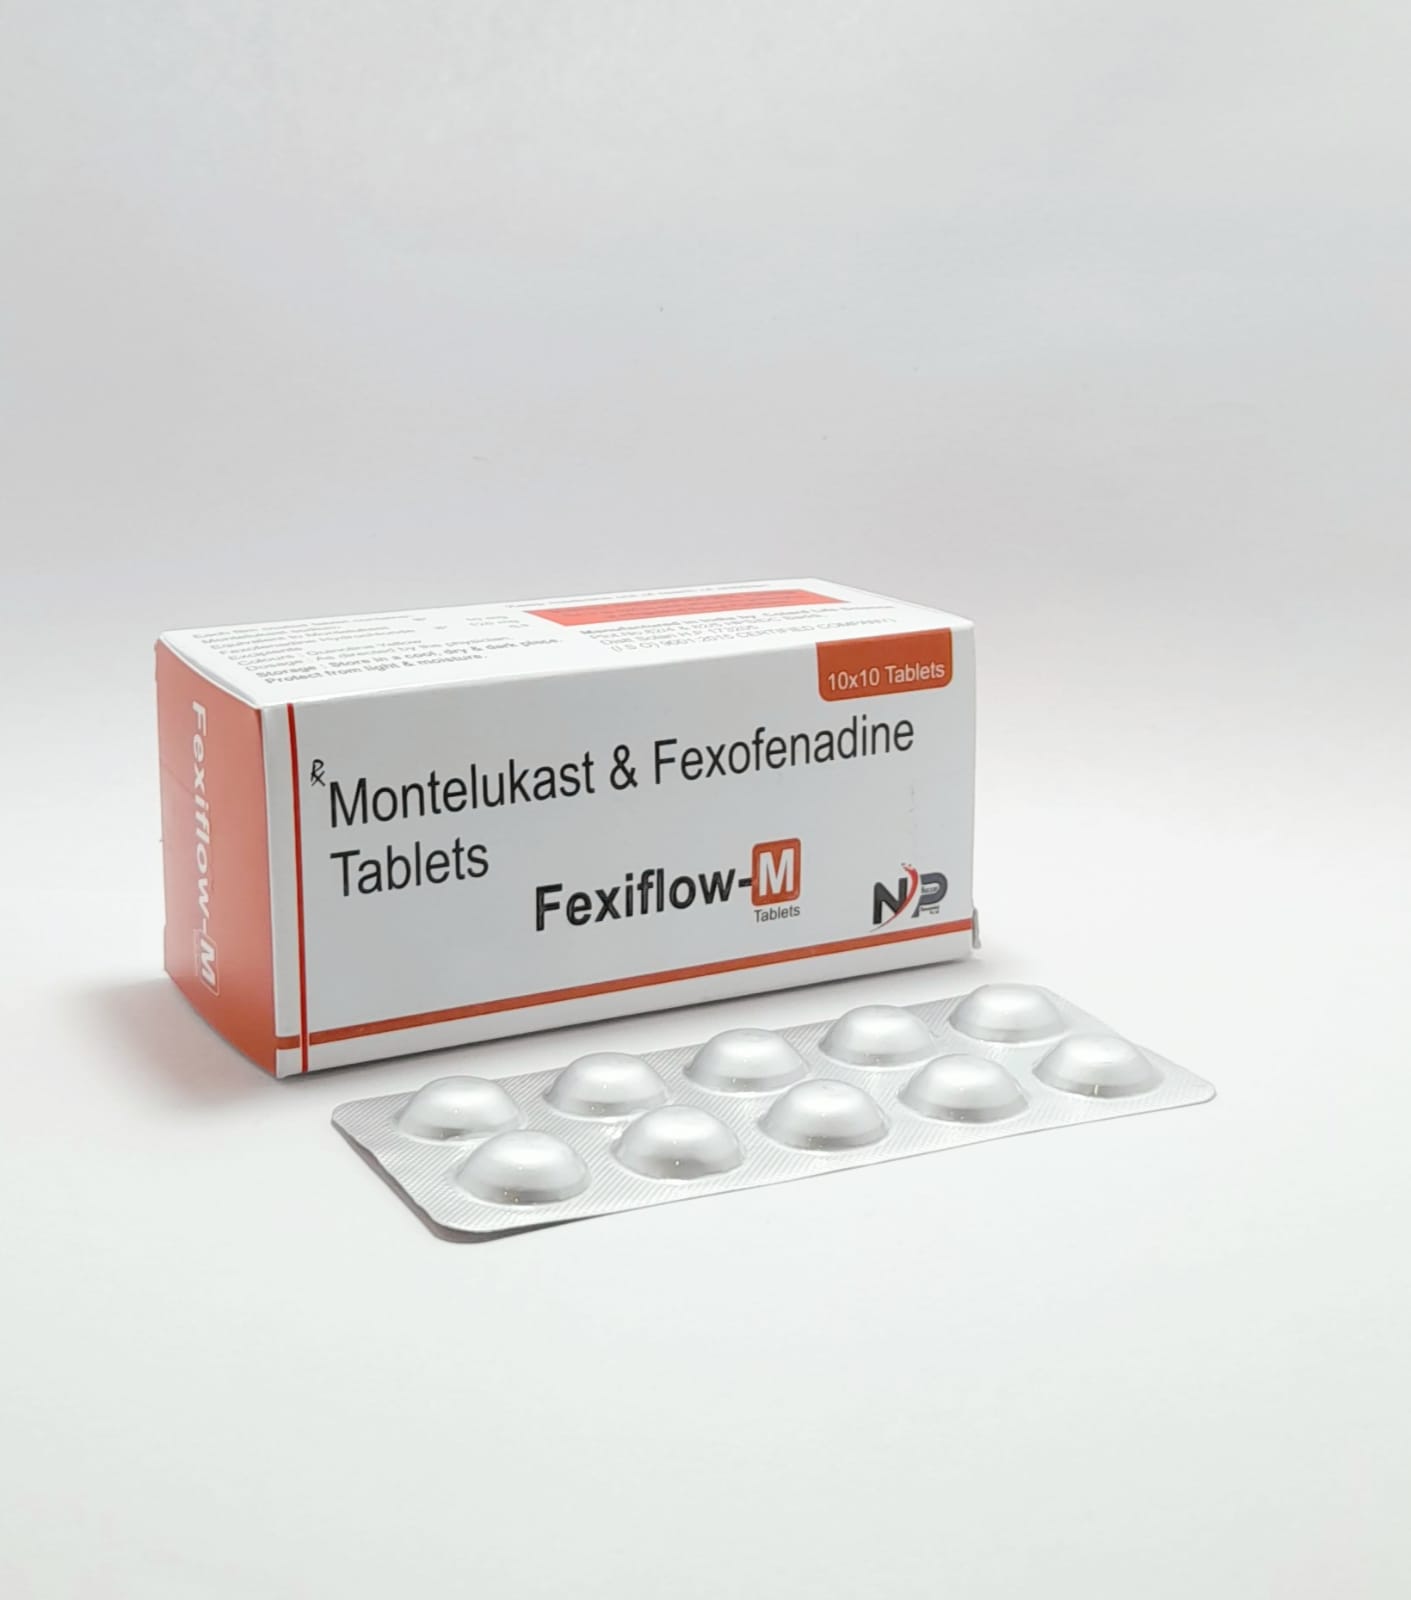 Product Name: Fexiflow M, Compositions of Fexiflow M are Monetelukast & Fexofenadine Tablets - Noxxon Pharmaceuticals Private Limited